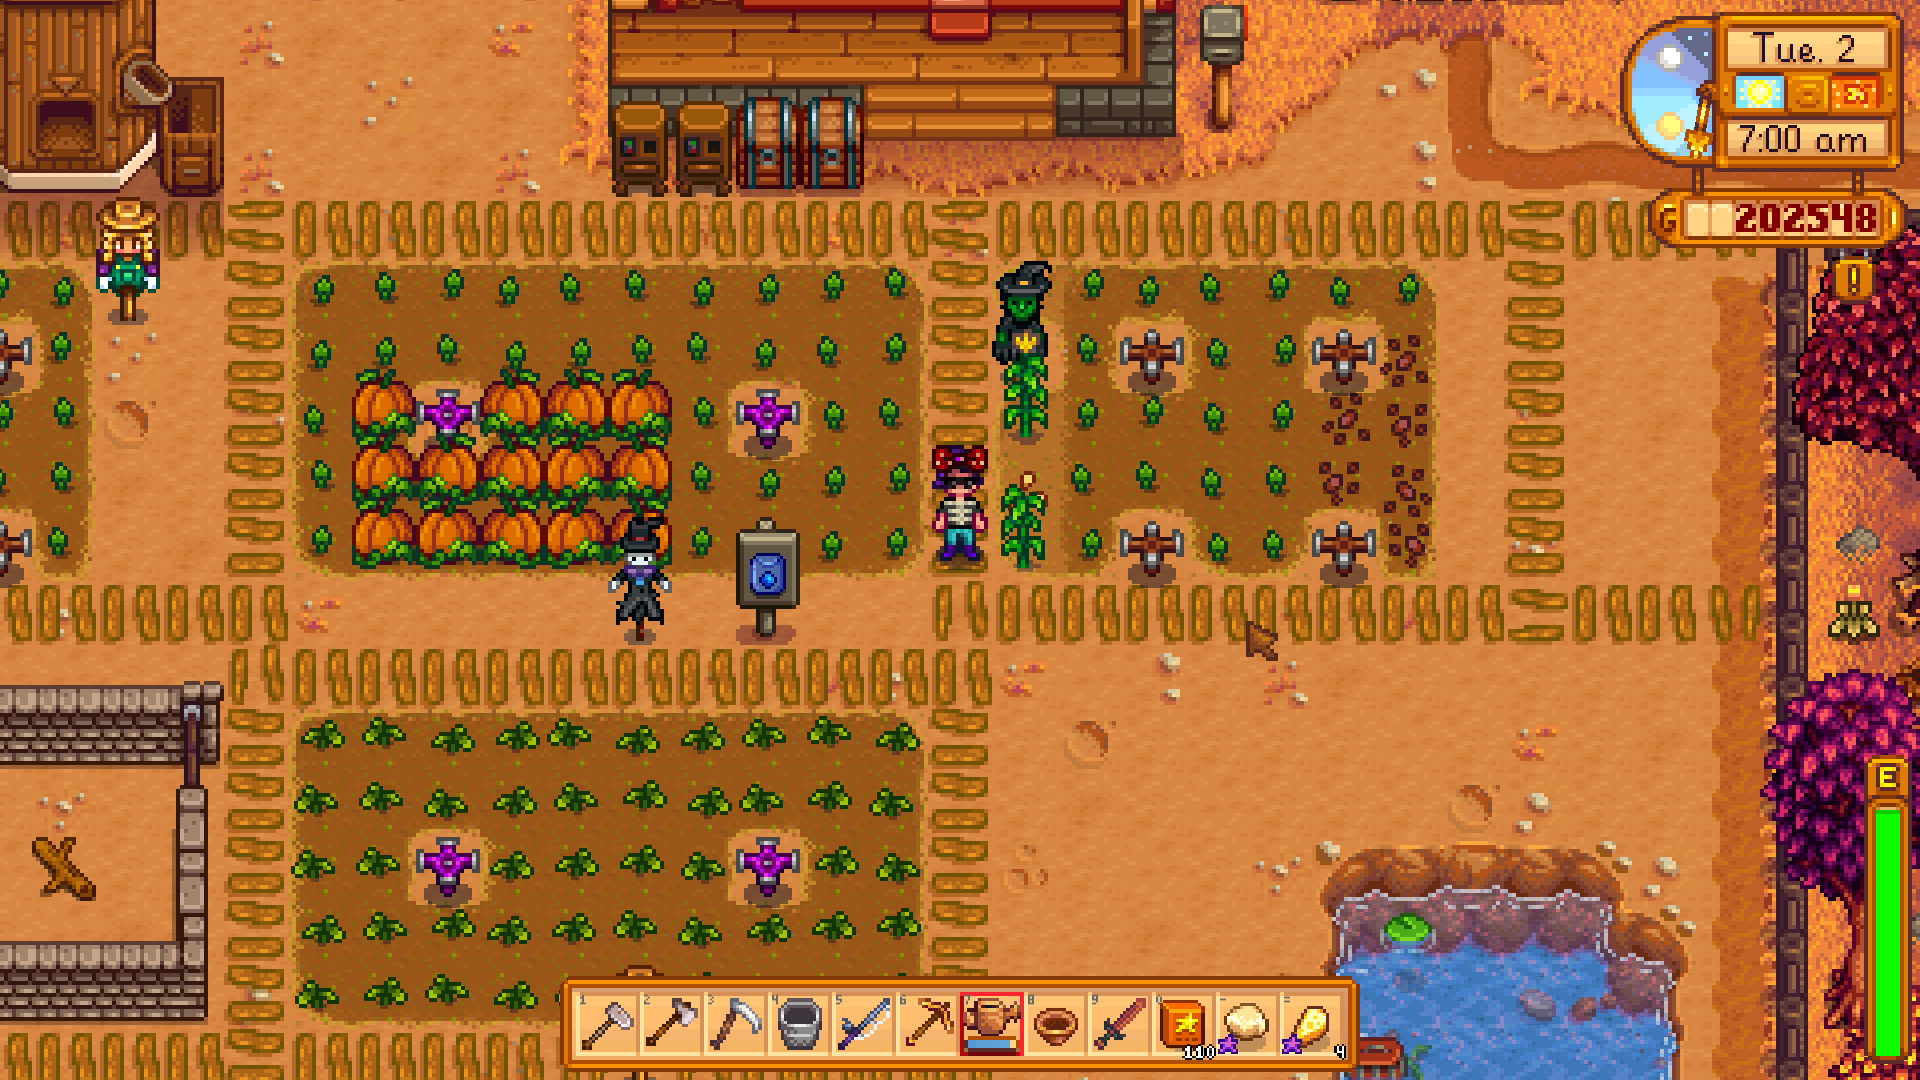 The player character standing amid fields with sprouting plants and seeds; a noticeable patch of pumpkins is fully grown